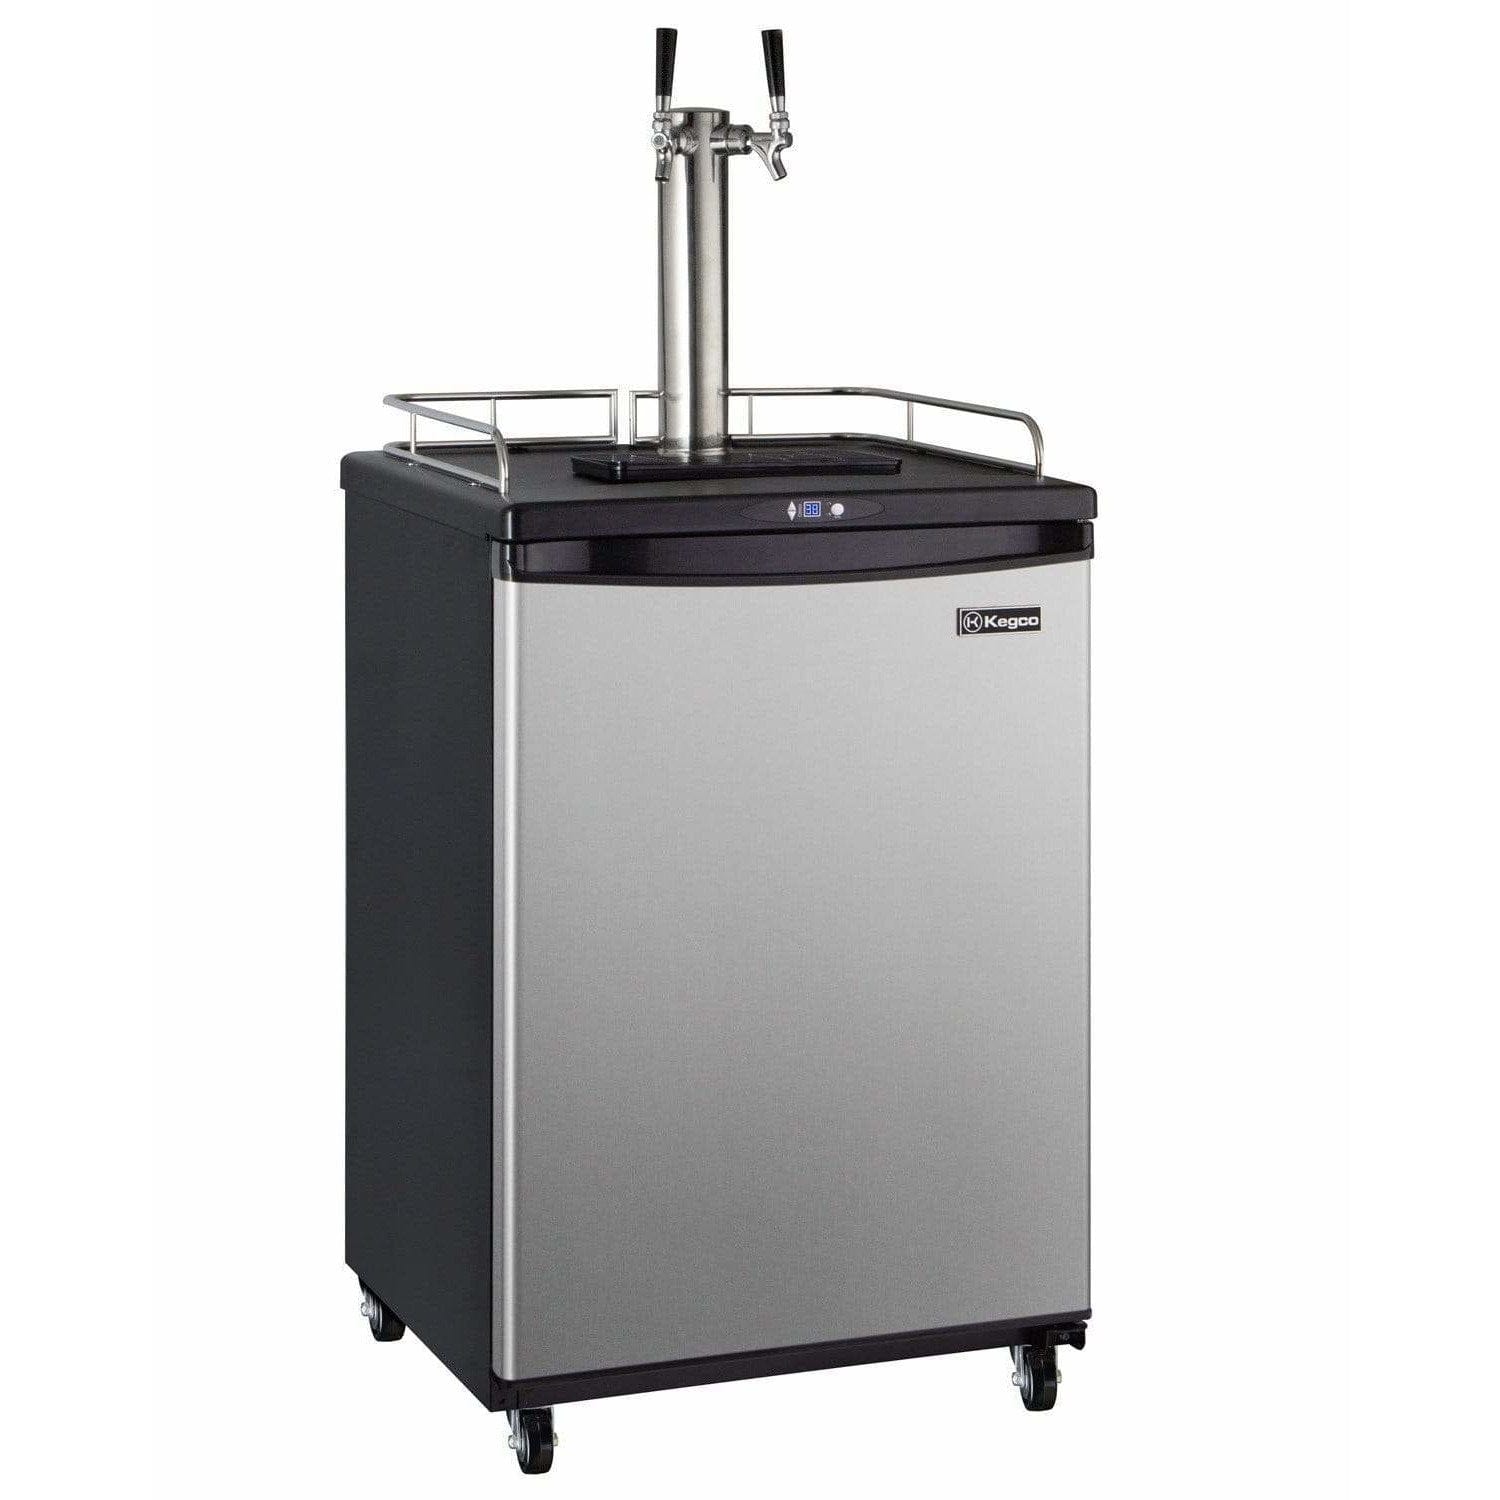 Kegco 24" Wide  Dual Tap Stainless Steel Home Brew Kegerator HBK163S-2 Wine Coolers Empire